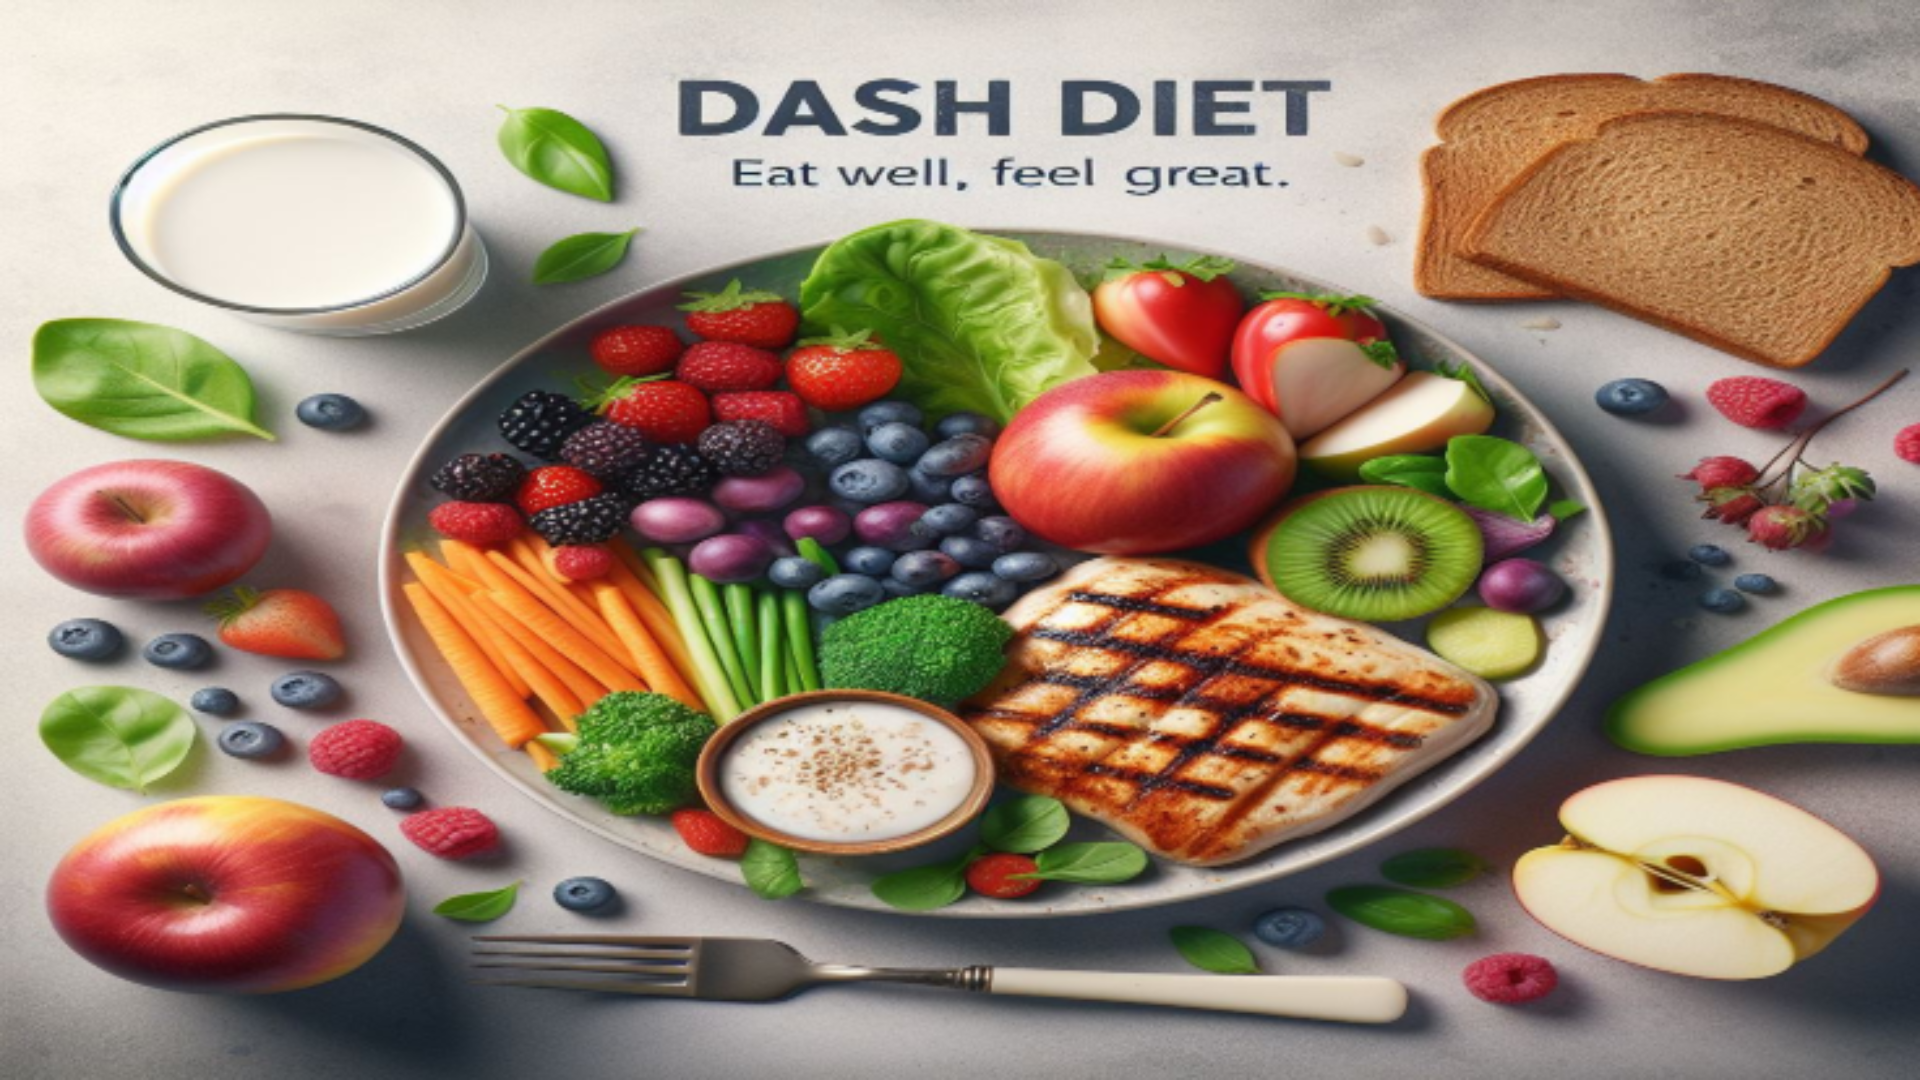 DASH Diet: Fight high blood pressure naturally! Learn about fruits, veggies, whole grains & how it works. Get started with this evidence-based plan.